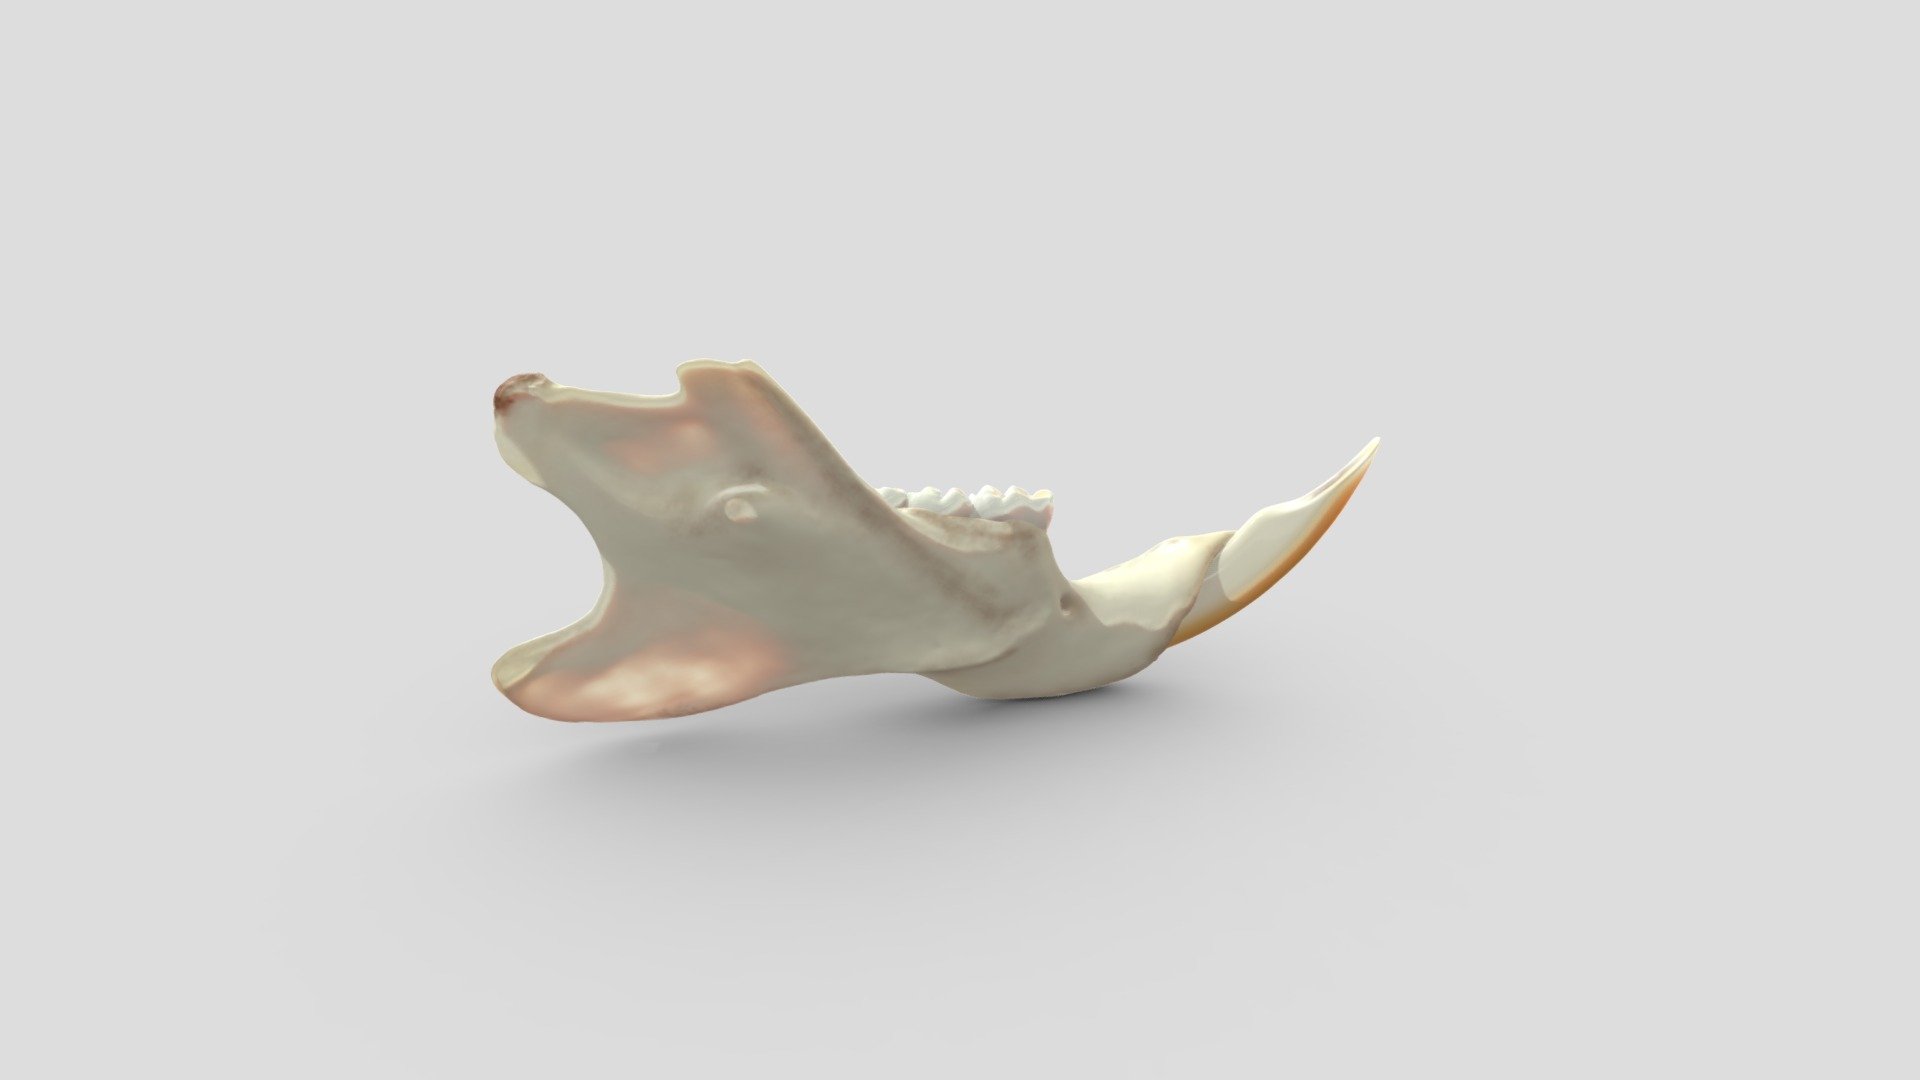 This jaw is part of my anatomical rat. I optimized it for interactive view, but need to work on the internal structure of the bone 3d model